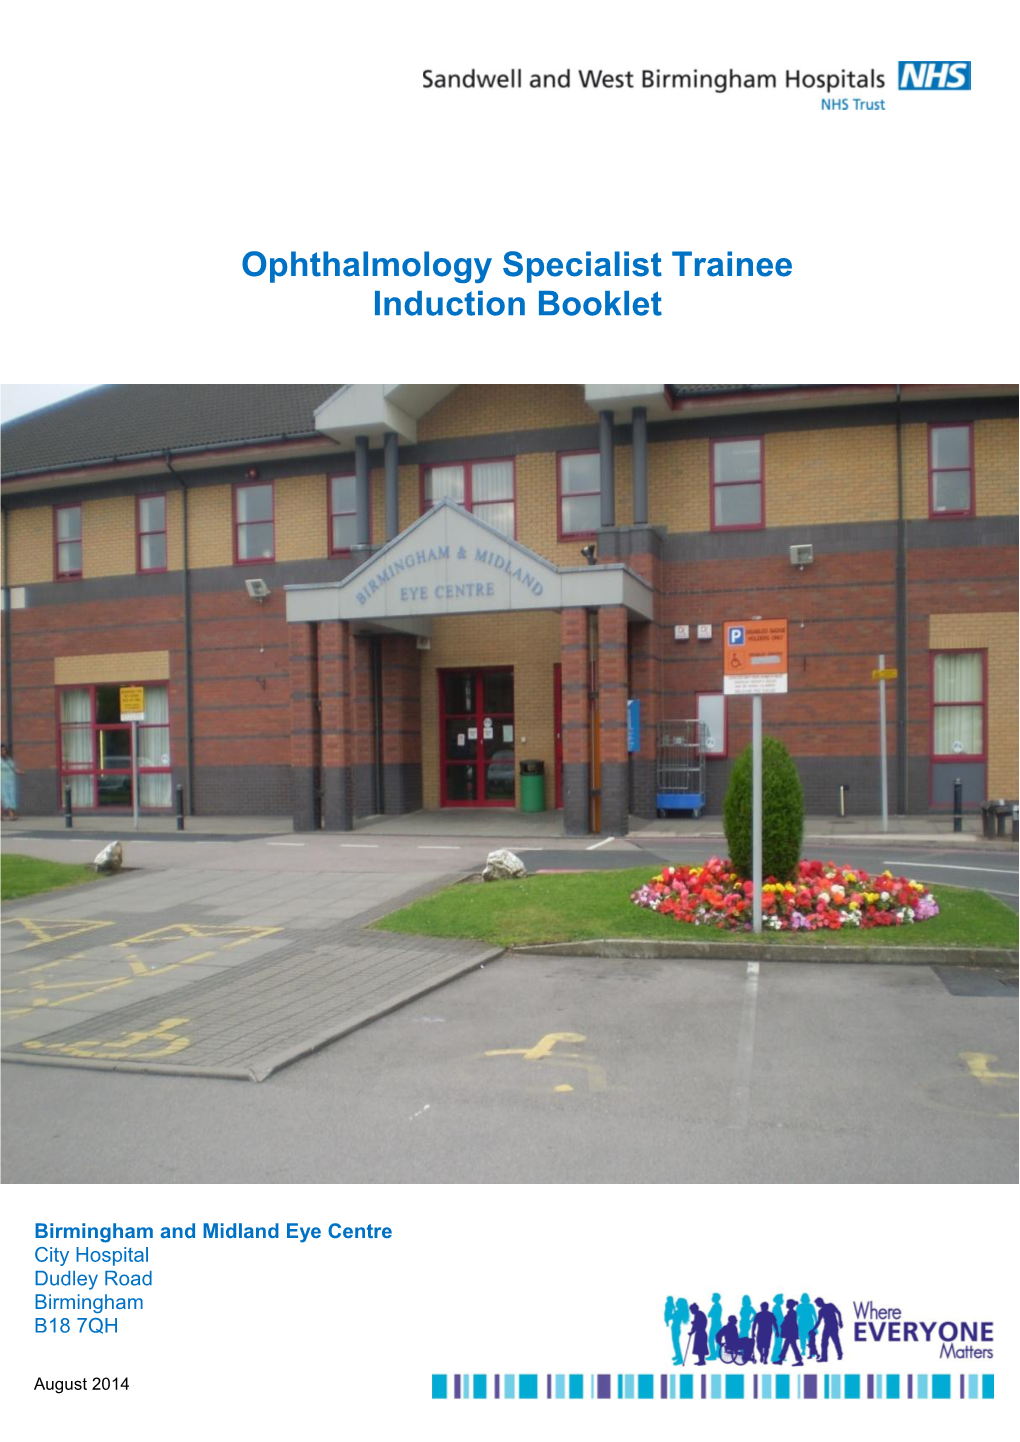 Ophthalmology Specialist Trainee Induction Booklet